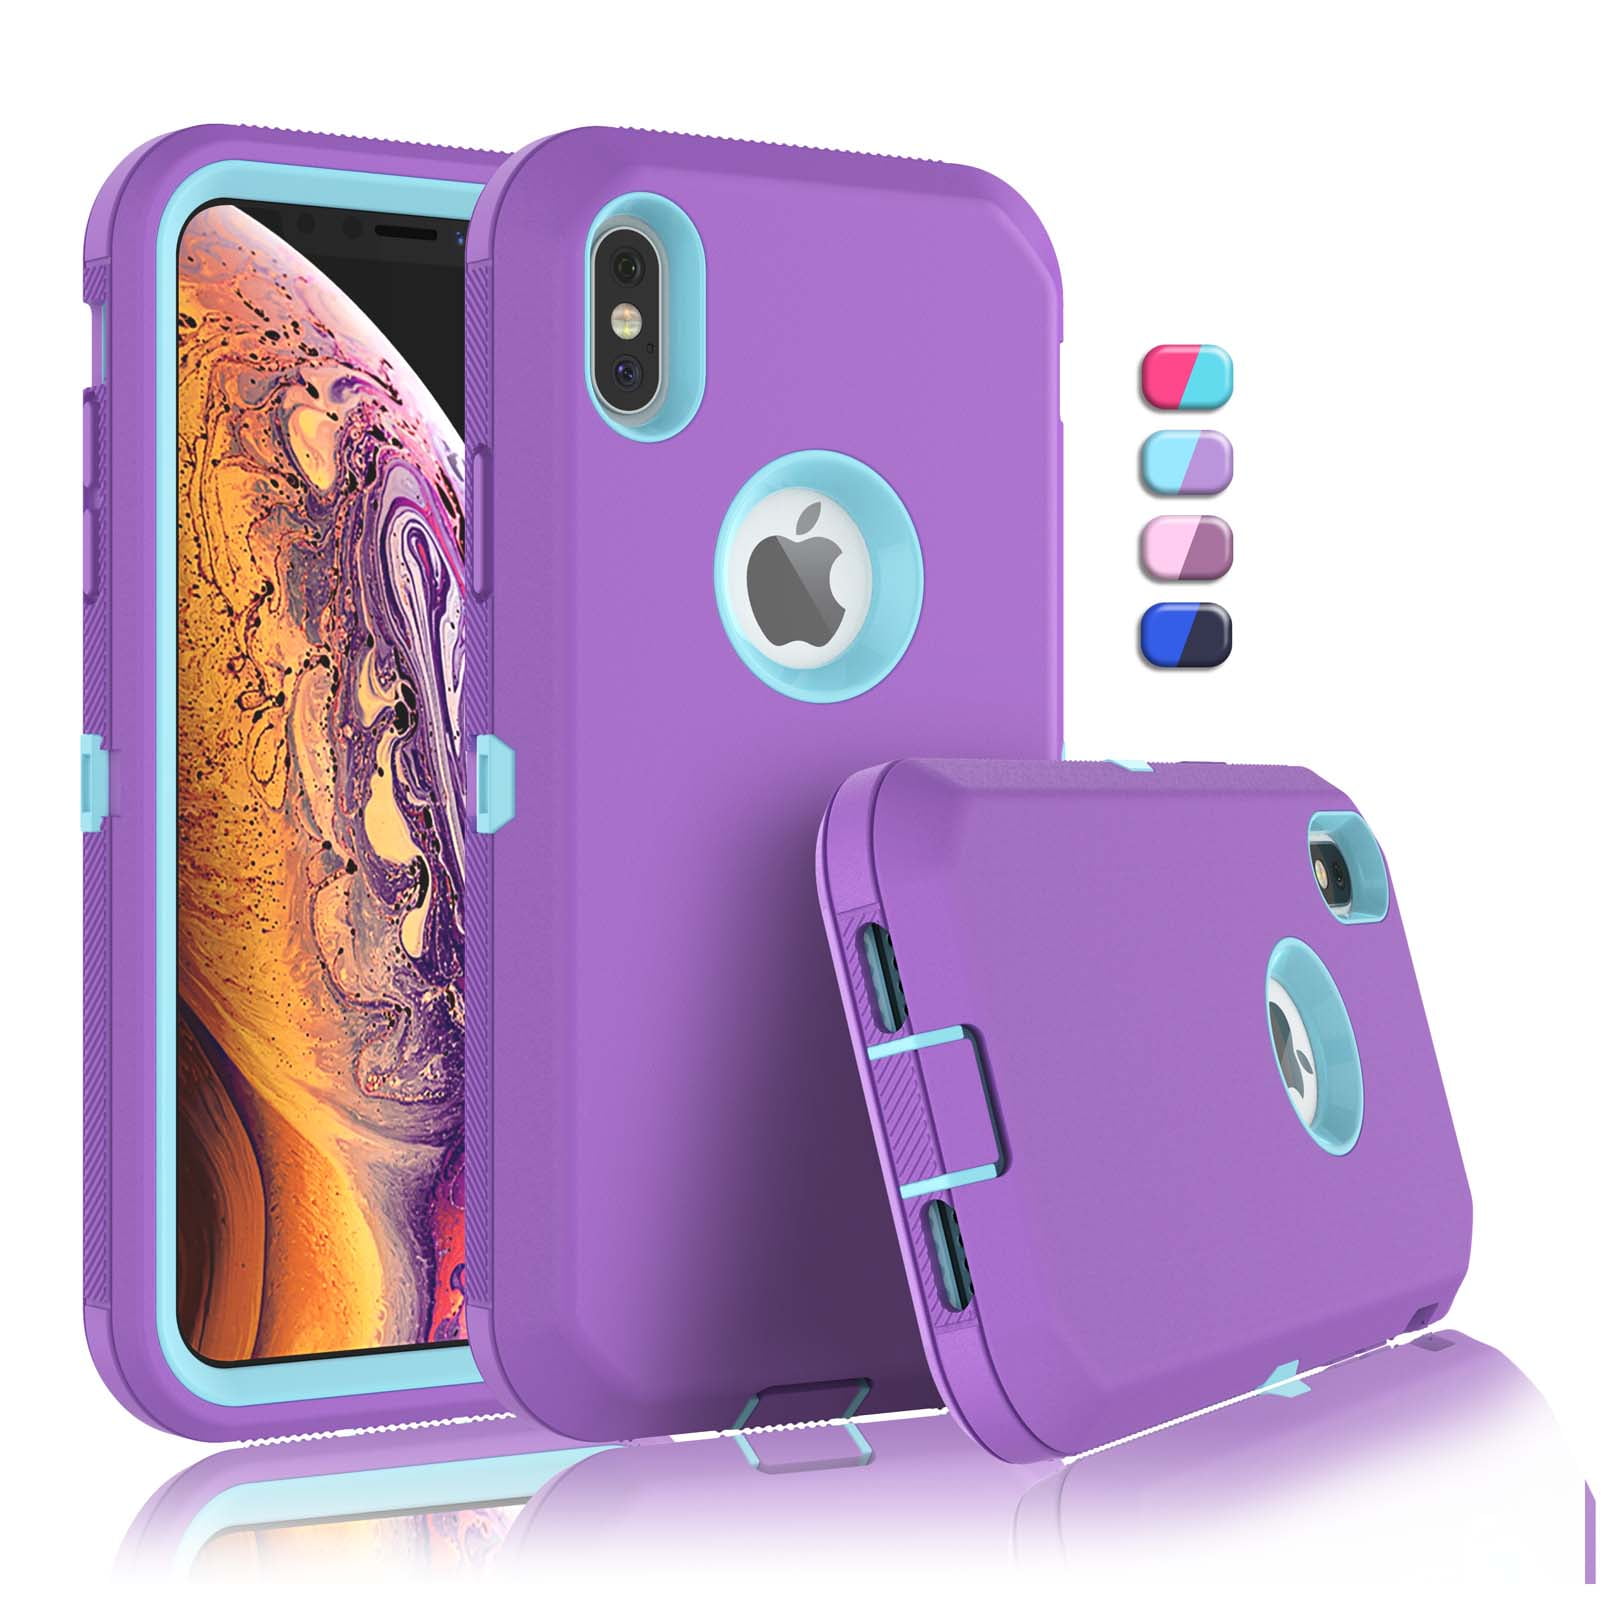 iPhone XS / iPhone X Cases, Sturdy Phone Case for iPhone X XS 5.8